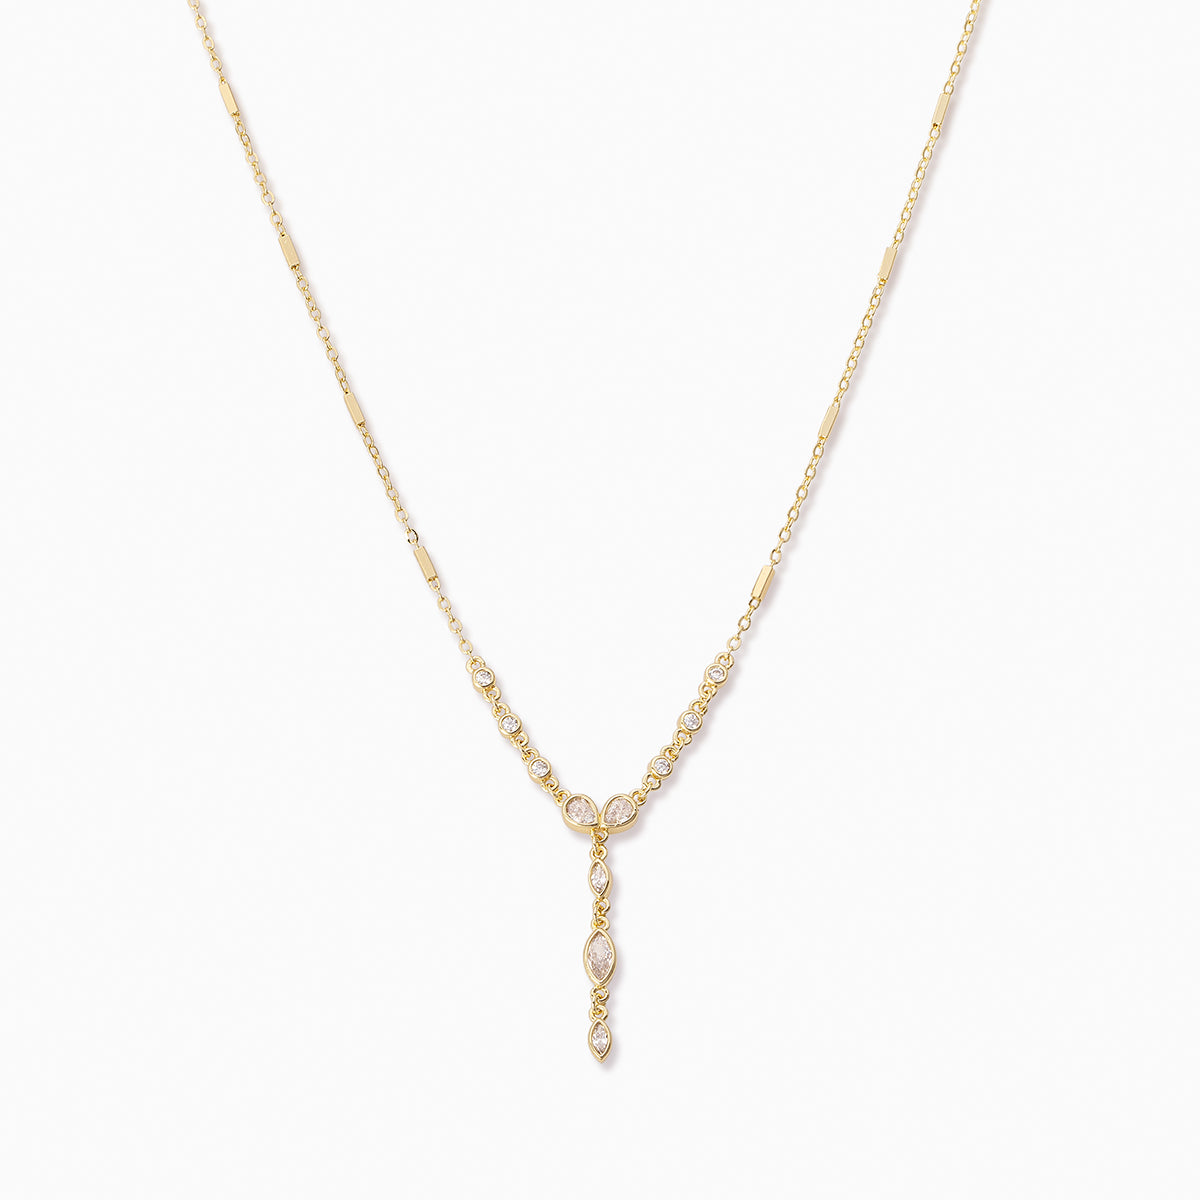 Drama Queen Necklace | Gold | Product Image | Uncommon James